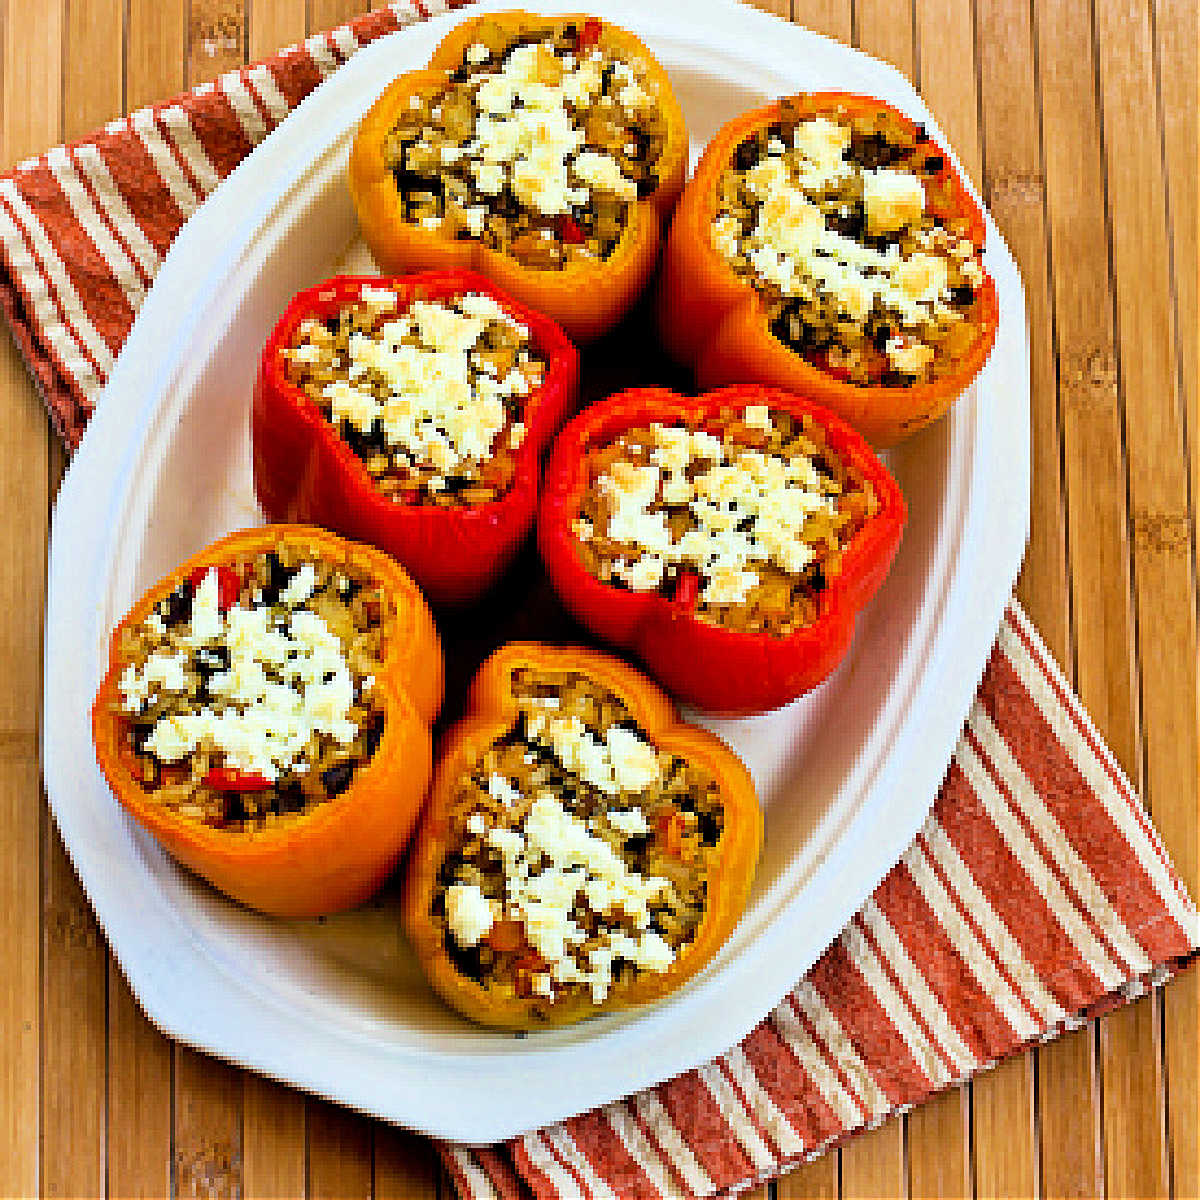 Vegetarian Stuffed Peppers (with mushrooms and Feta) shown on serving plate with red, yellow, and orange peppers.